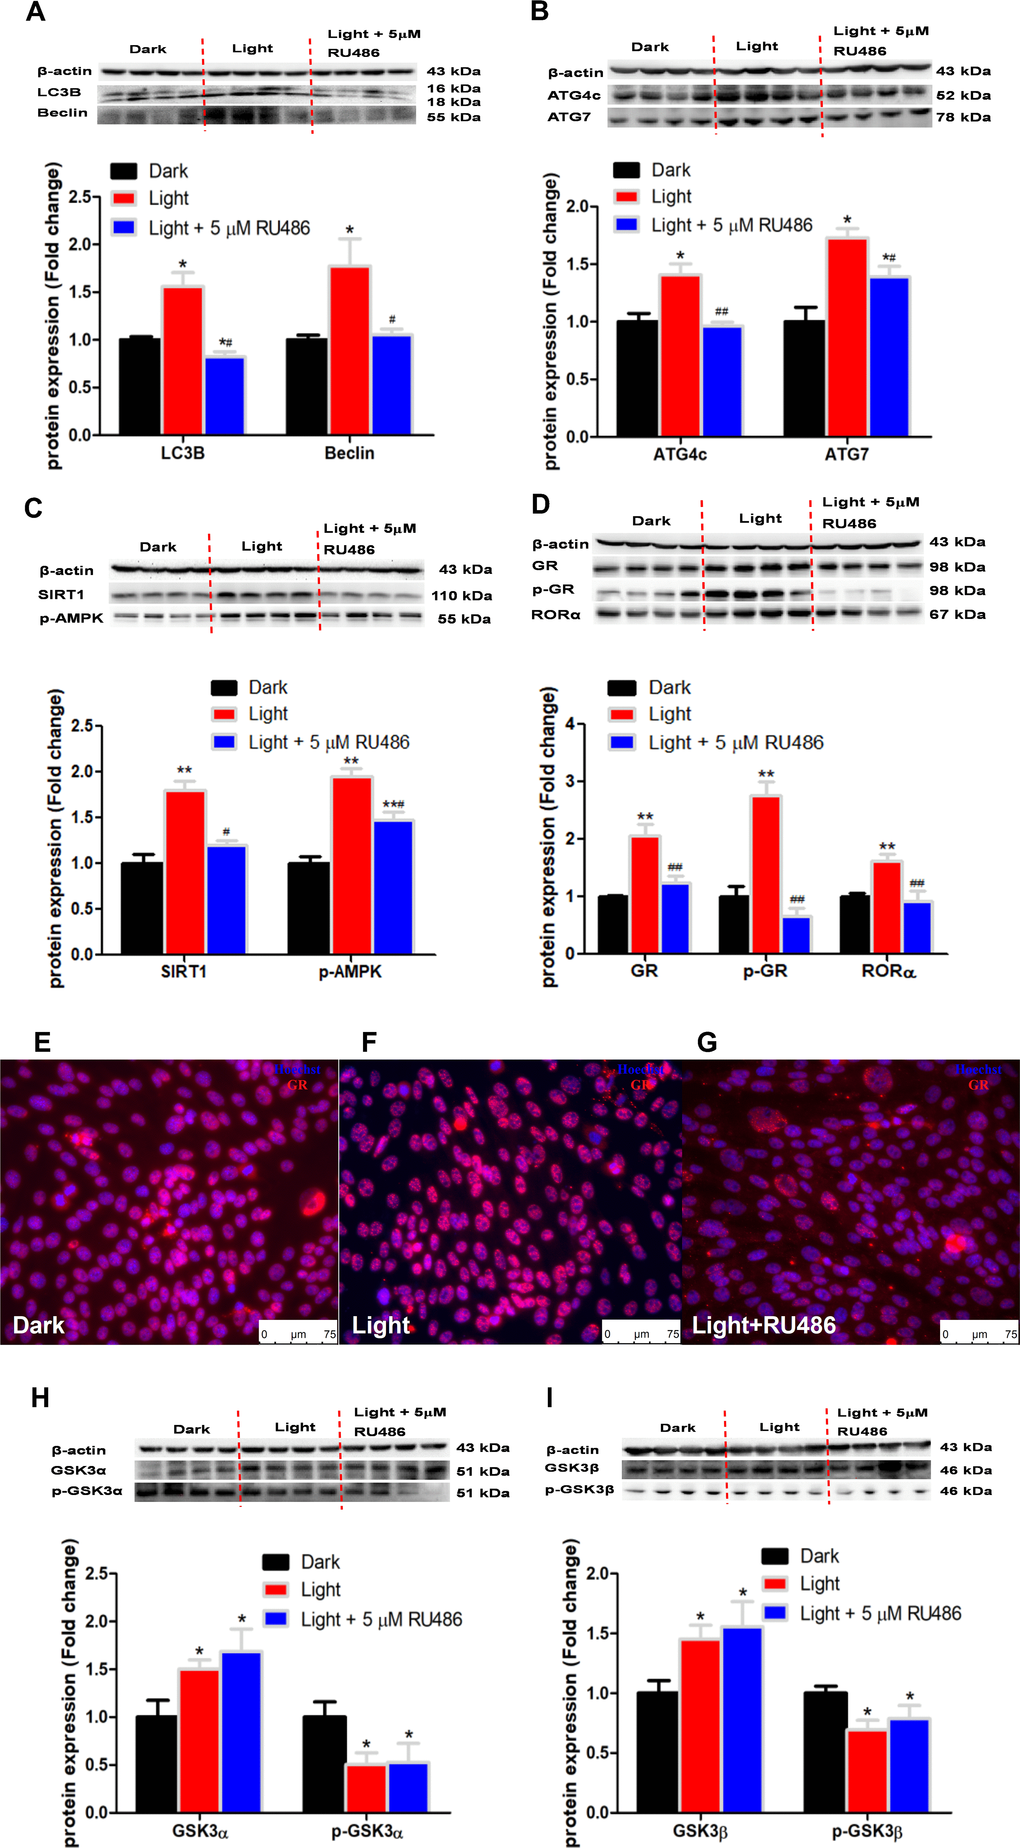 GR inhibitor, RU486, rescues the expression of autophagy-related proteins and nuclear receptor RORα expression, yet not GSK3α and GSK-3β in light exposure cells. (A–D) Protein content of LC3B, Beclin, ATG4c, ATG7, SIRT1, phospho-AMPK, RORα, GR and phospho-GR. GR inhibitor RU486 completely rectified light-induced up-regulation of GR, phospho-GR, RORα and autophagy-related proteins, including LC3B, Beclin, ATG4c, ATG7, SIRT1 and phospho-AMPK, in HT-22 cells. Values are means ± SEM, *p p #p ##p E–G) Immunofluorescence of GR, showing that RU486 was able to restore light-induced GR activation and GR nuclear translocation. The nuclei were stained with Hoechst (blue) and GR was stained with GR antibody (red). Scale bars, 75 μm; (H–I) Protein content of total and phospho-GSK-3α/β (Ser21/9). Light-induced increase in total GSK-3α/β and decrease in phospho-GSK-3α/β were not rescued by RU486. Values are means ± SEM, *p 